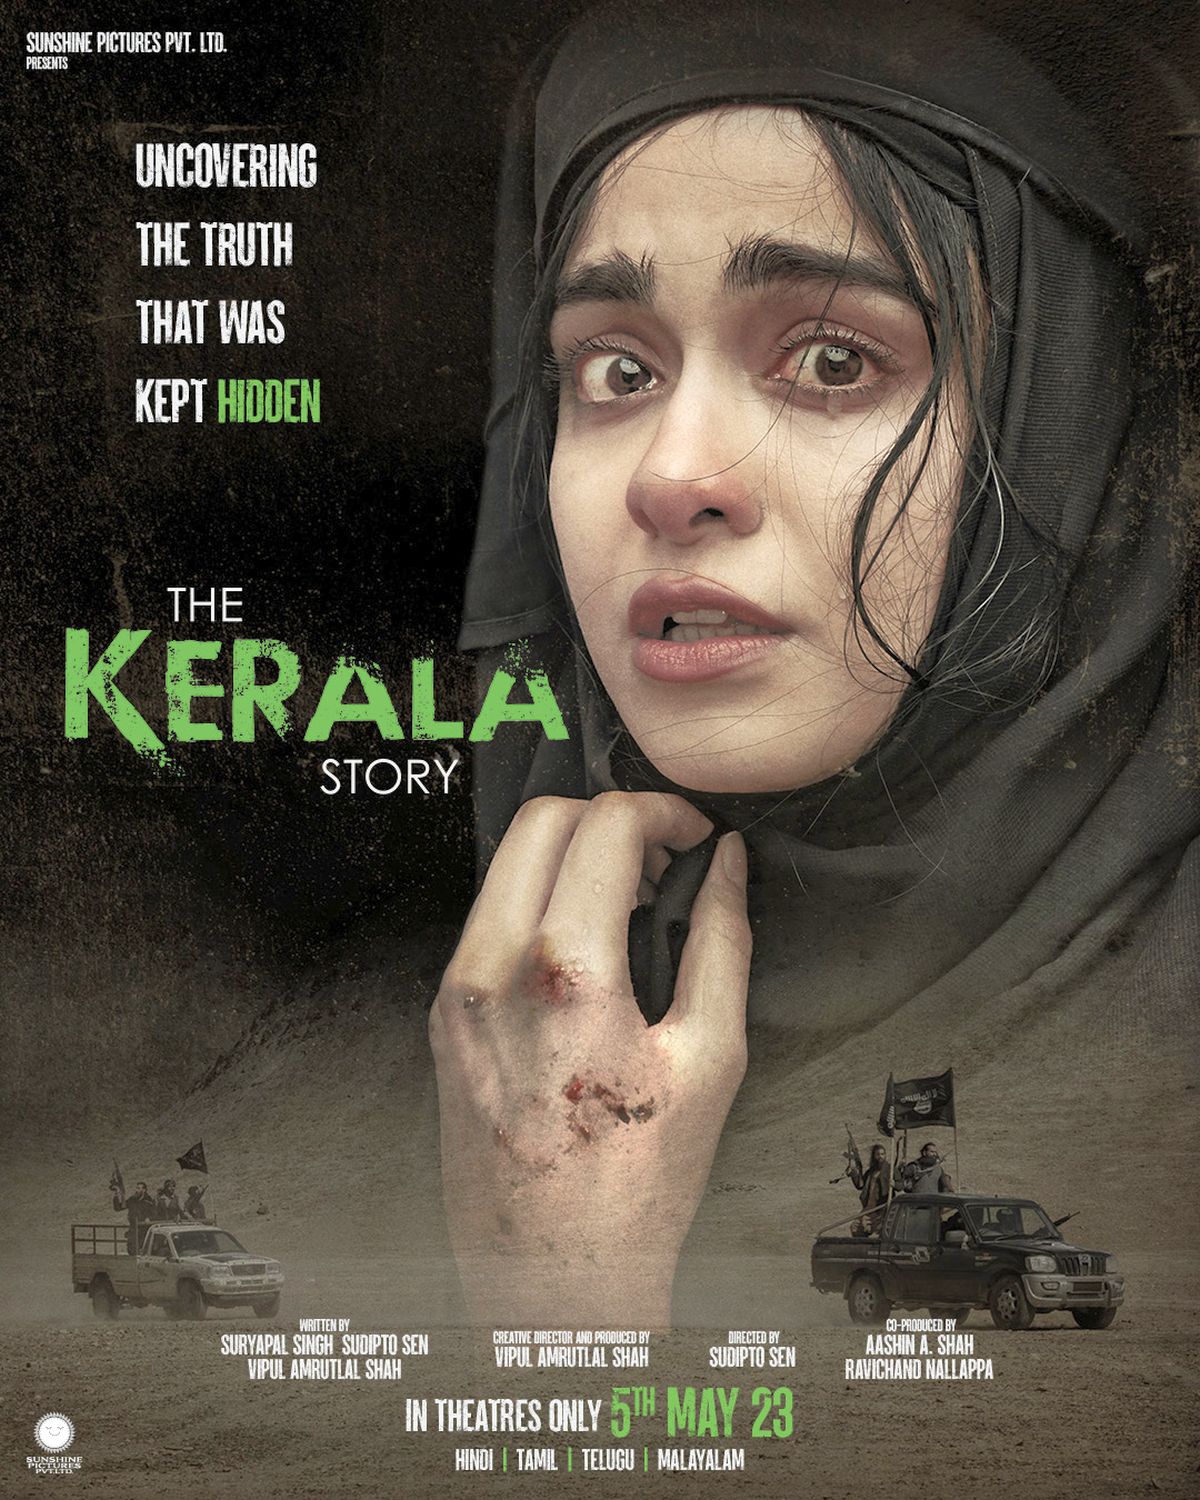 Movie halls in Bengal yet to agree to screen 'Kerala Story' despite SC